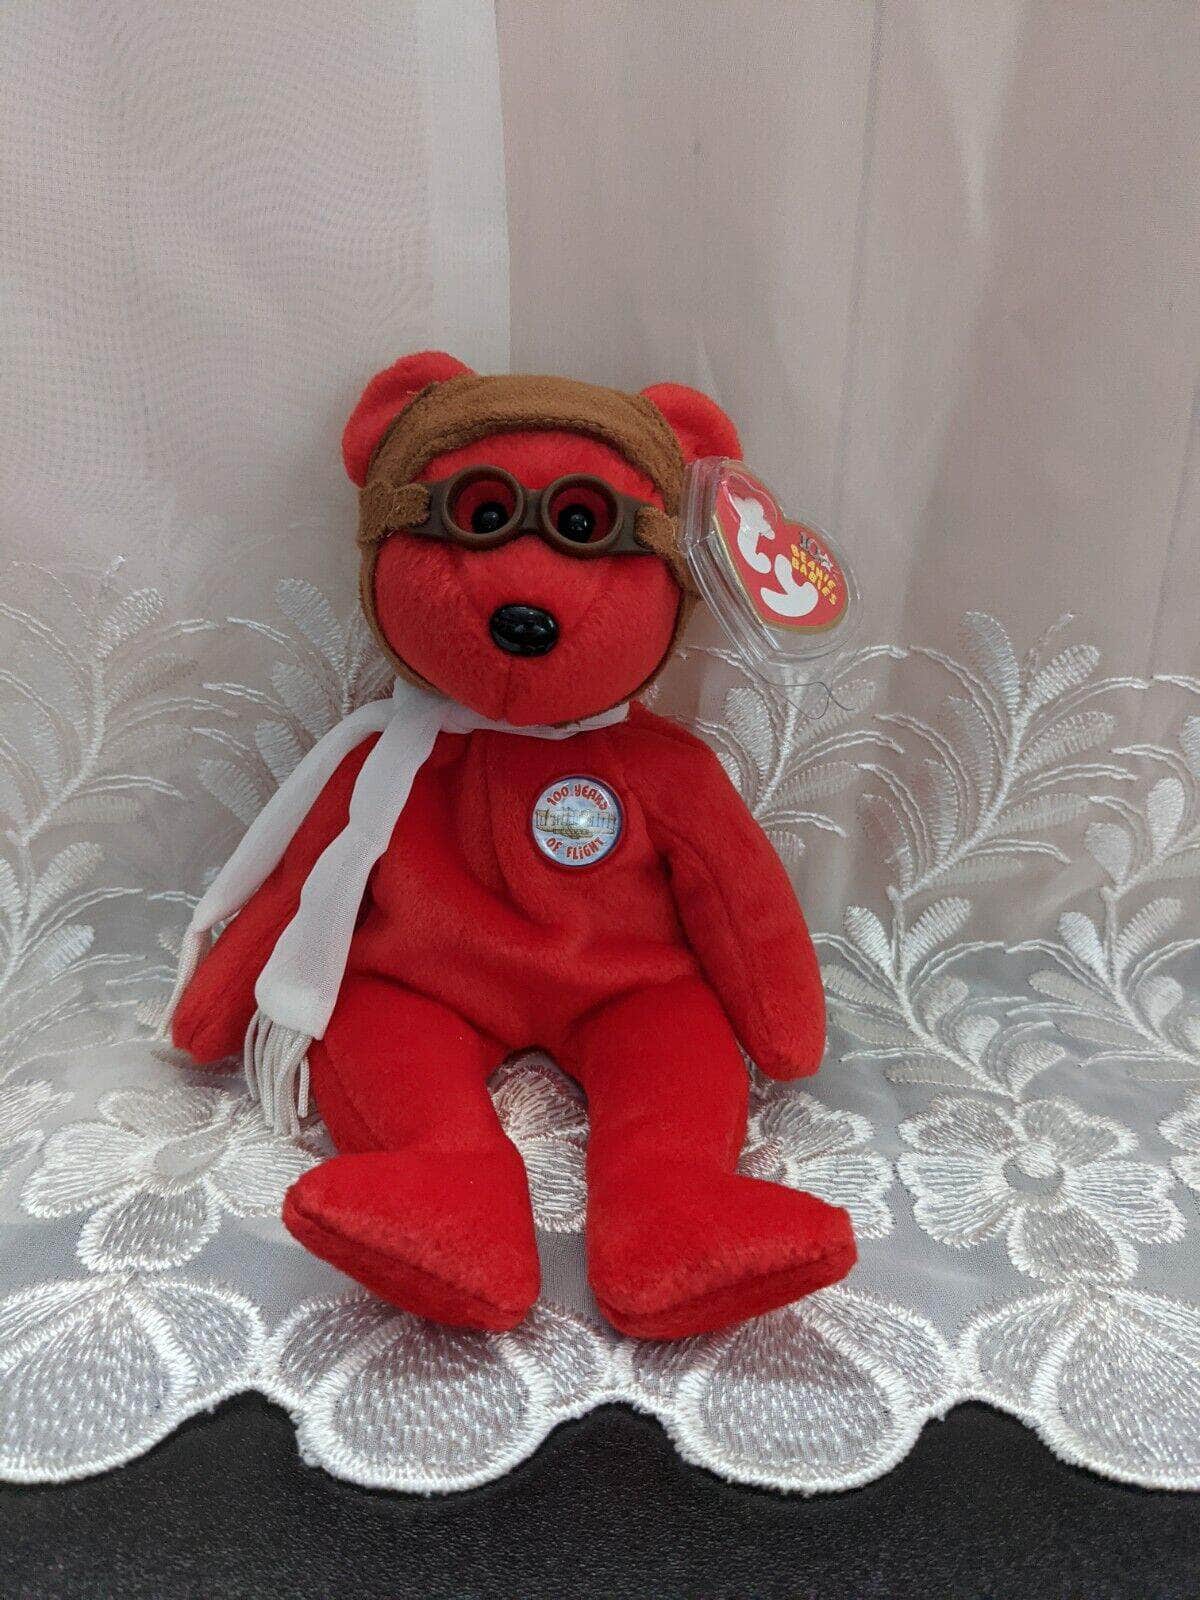 Ty Beanie Baby - Bearon The Red Bear (8.5in) - Vintage Beanies Canada